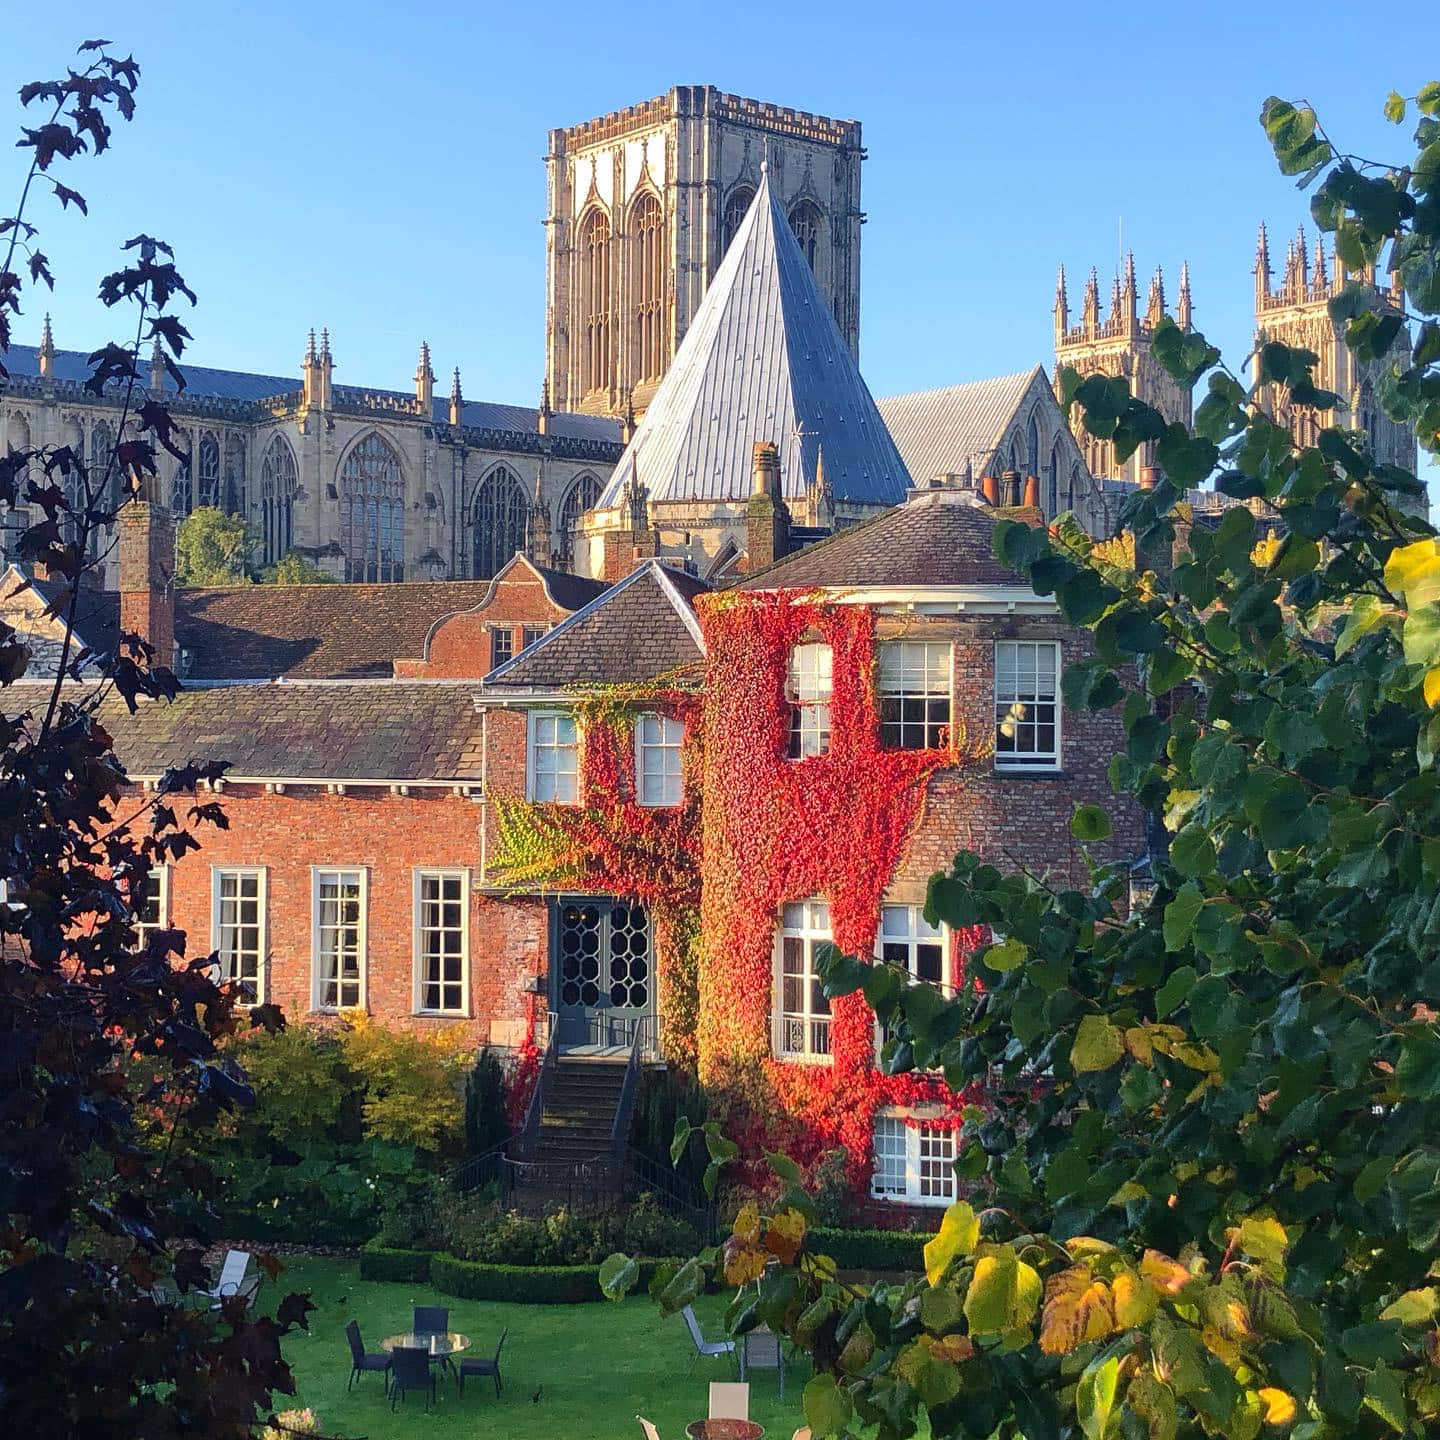 Discover the Historical City of York